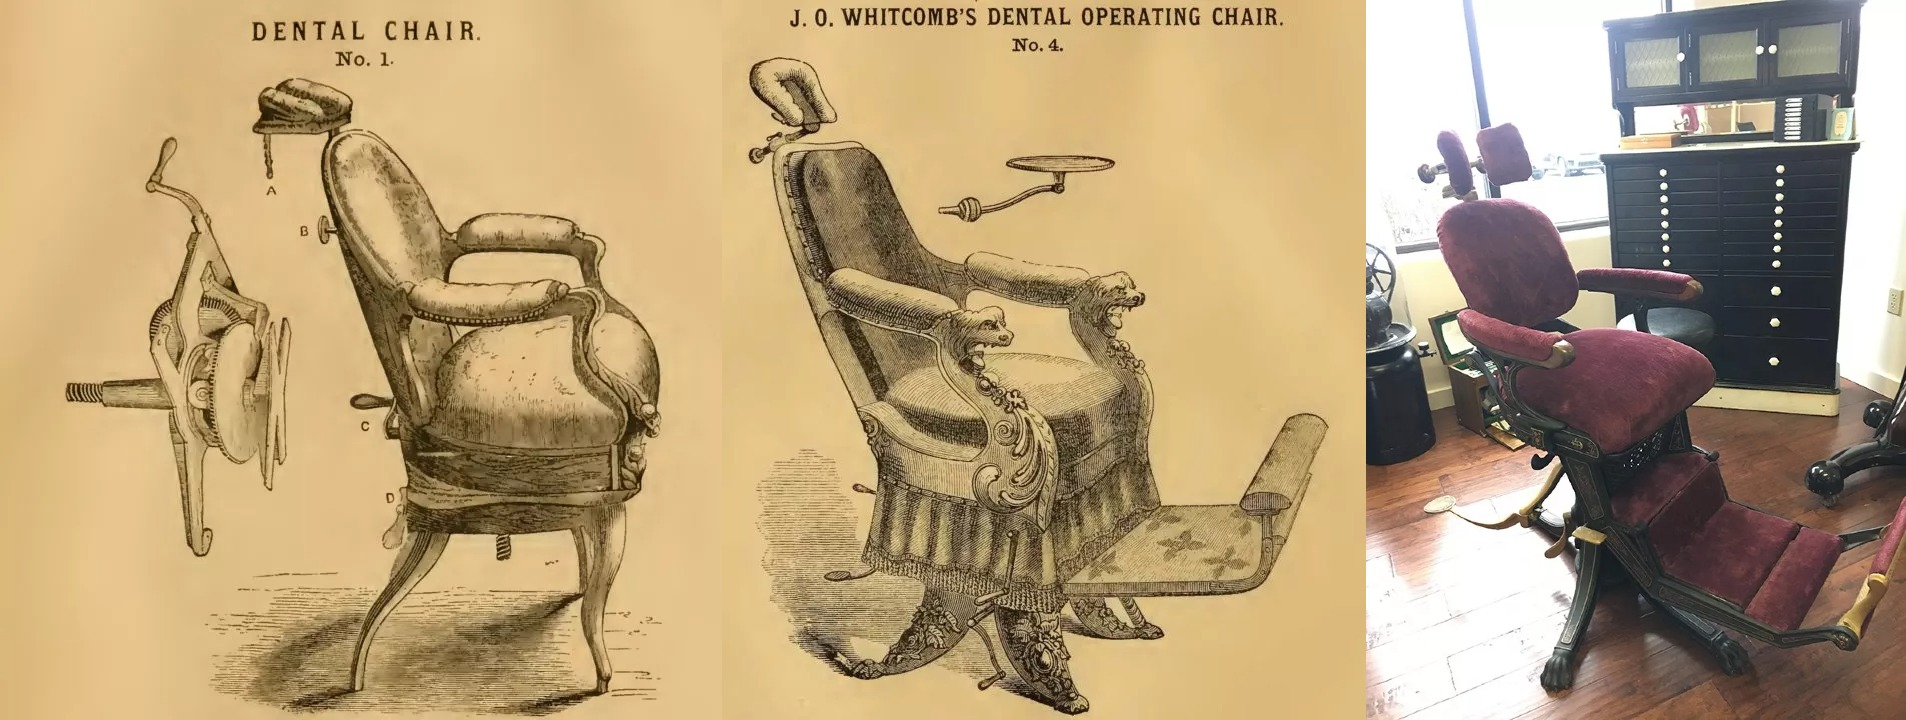 Images of historical dental chairs: two illustrations and one photograph.